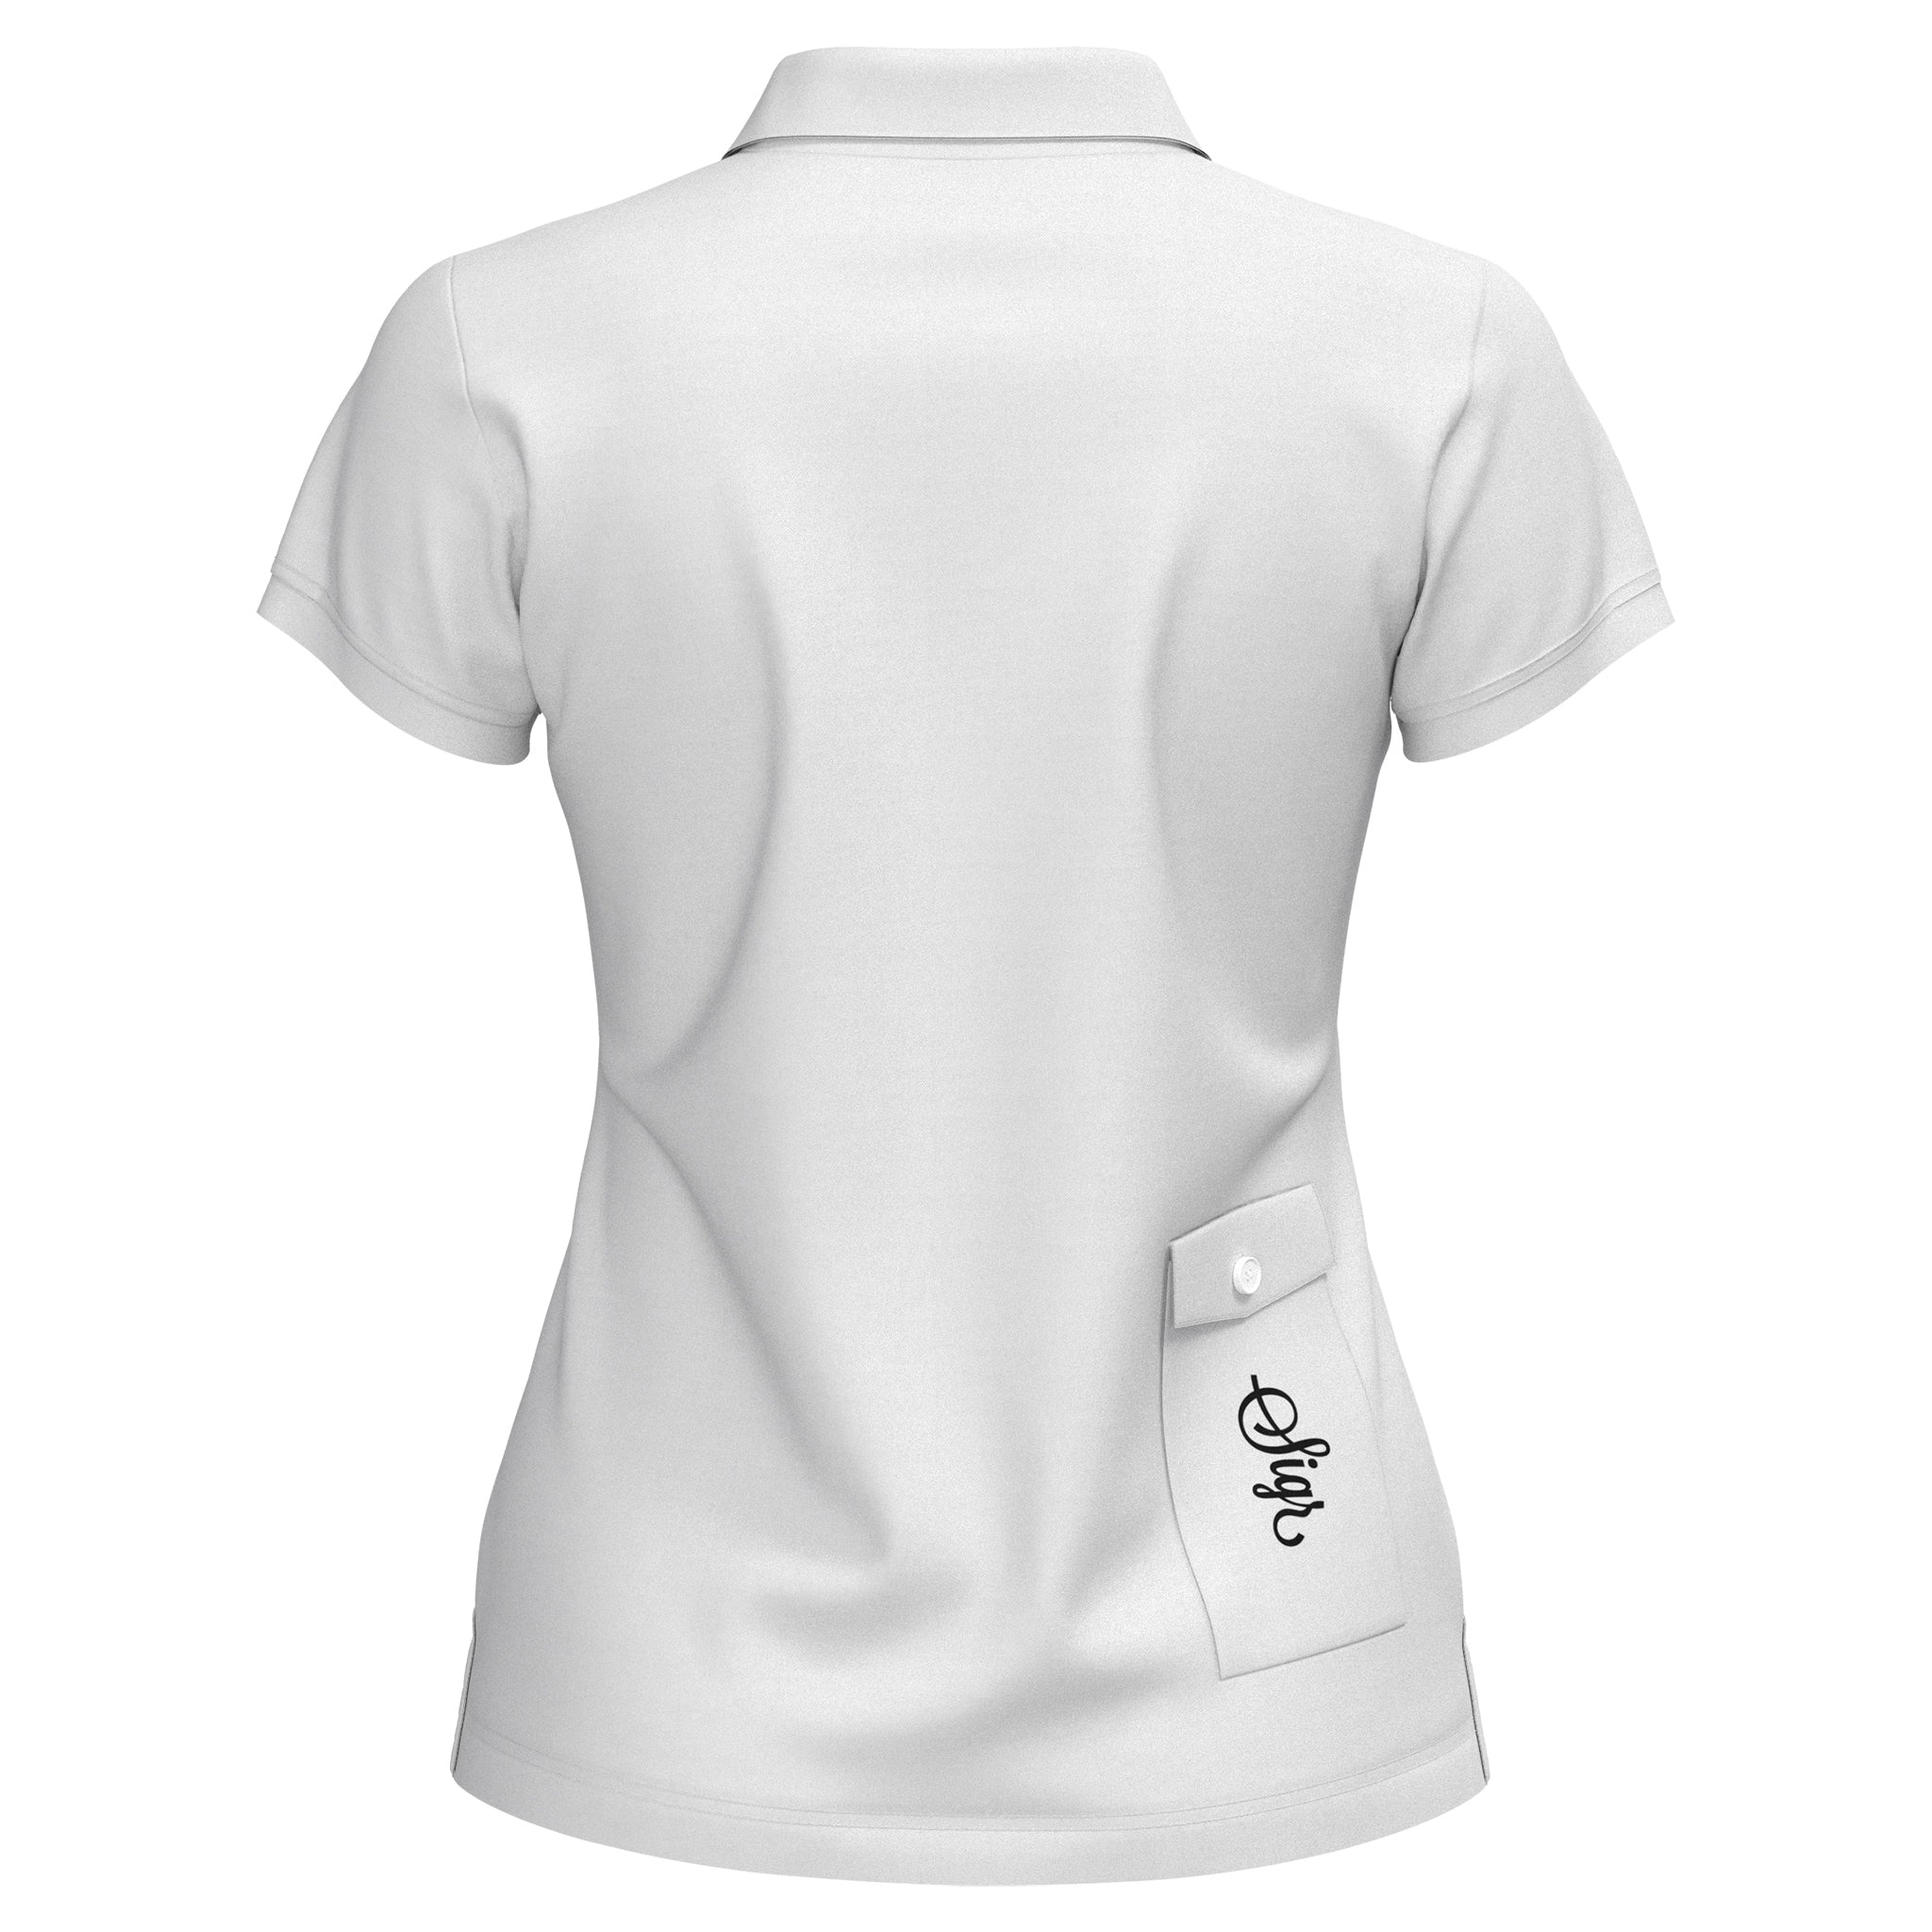 Pike - White Polo Shirt with Sigr Logo for Women